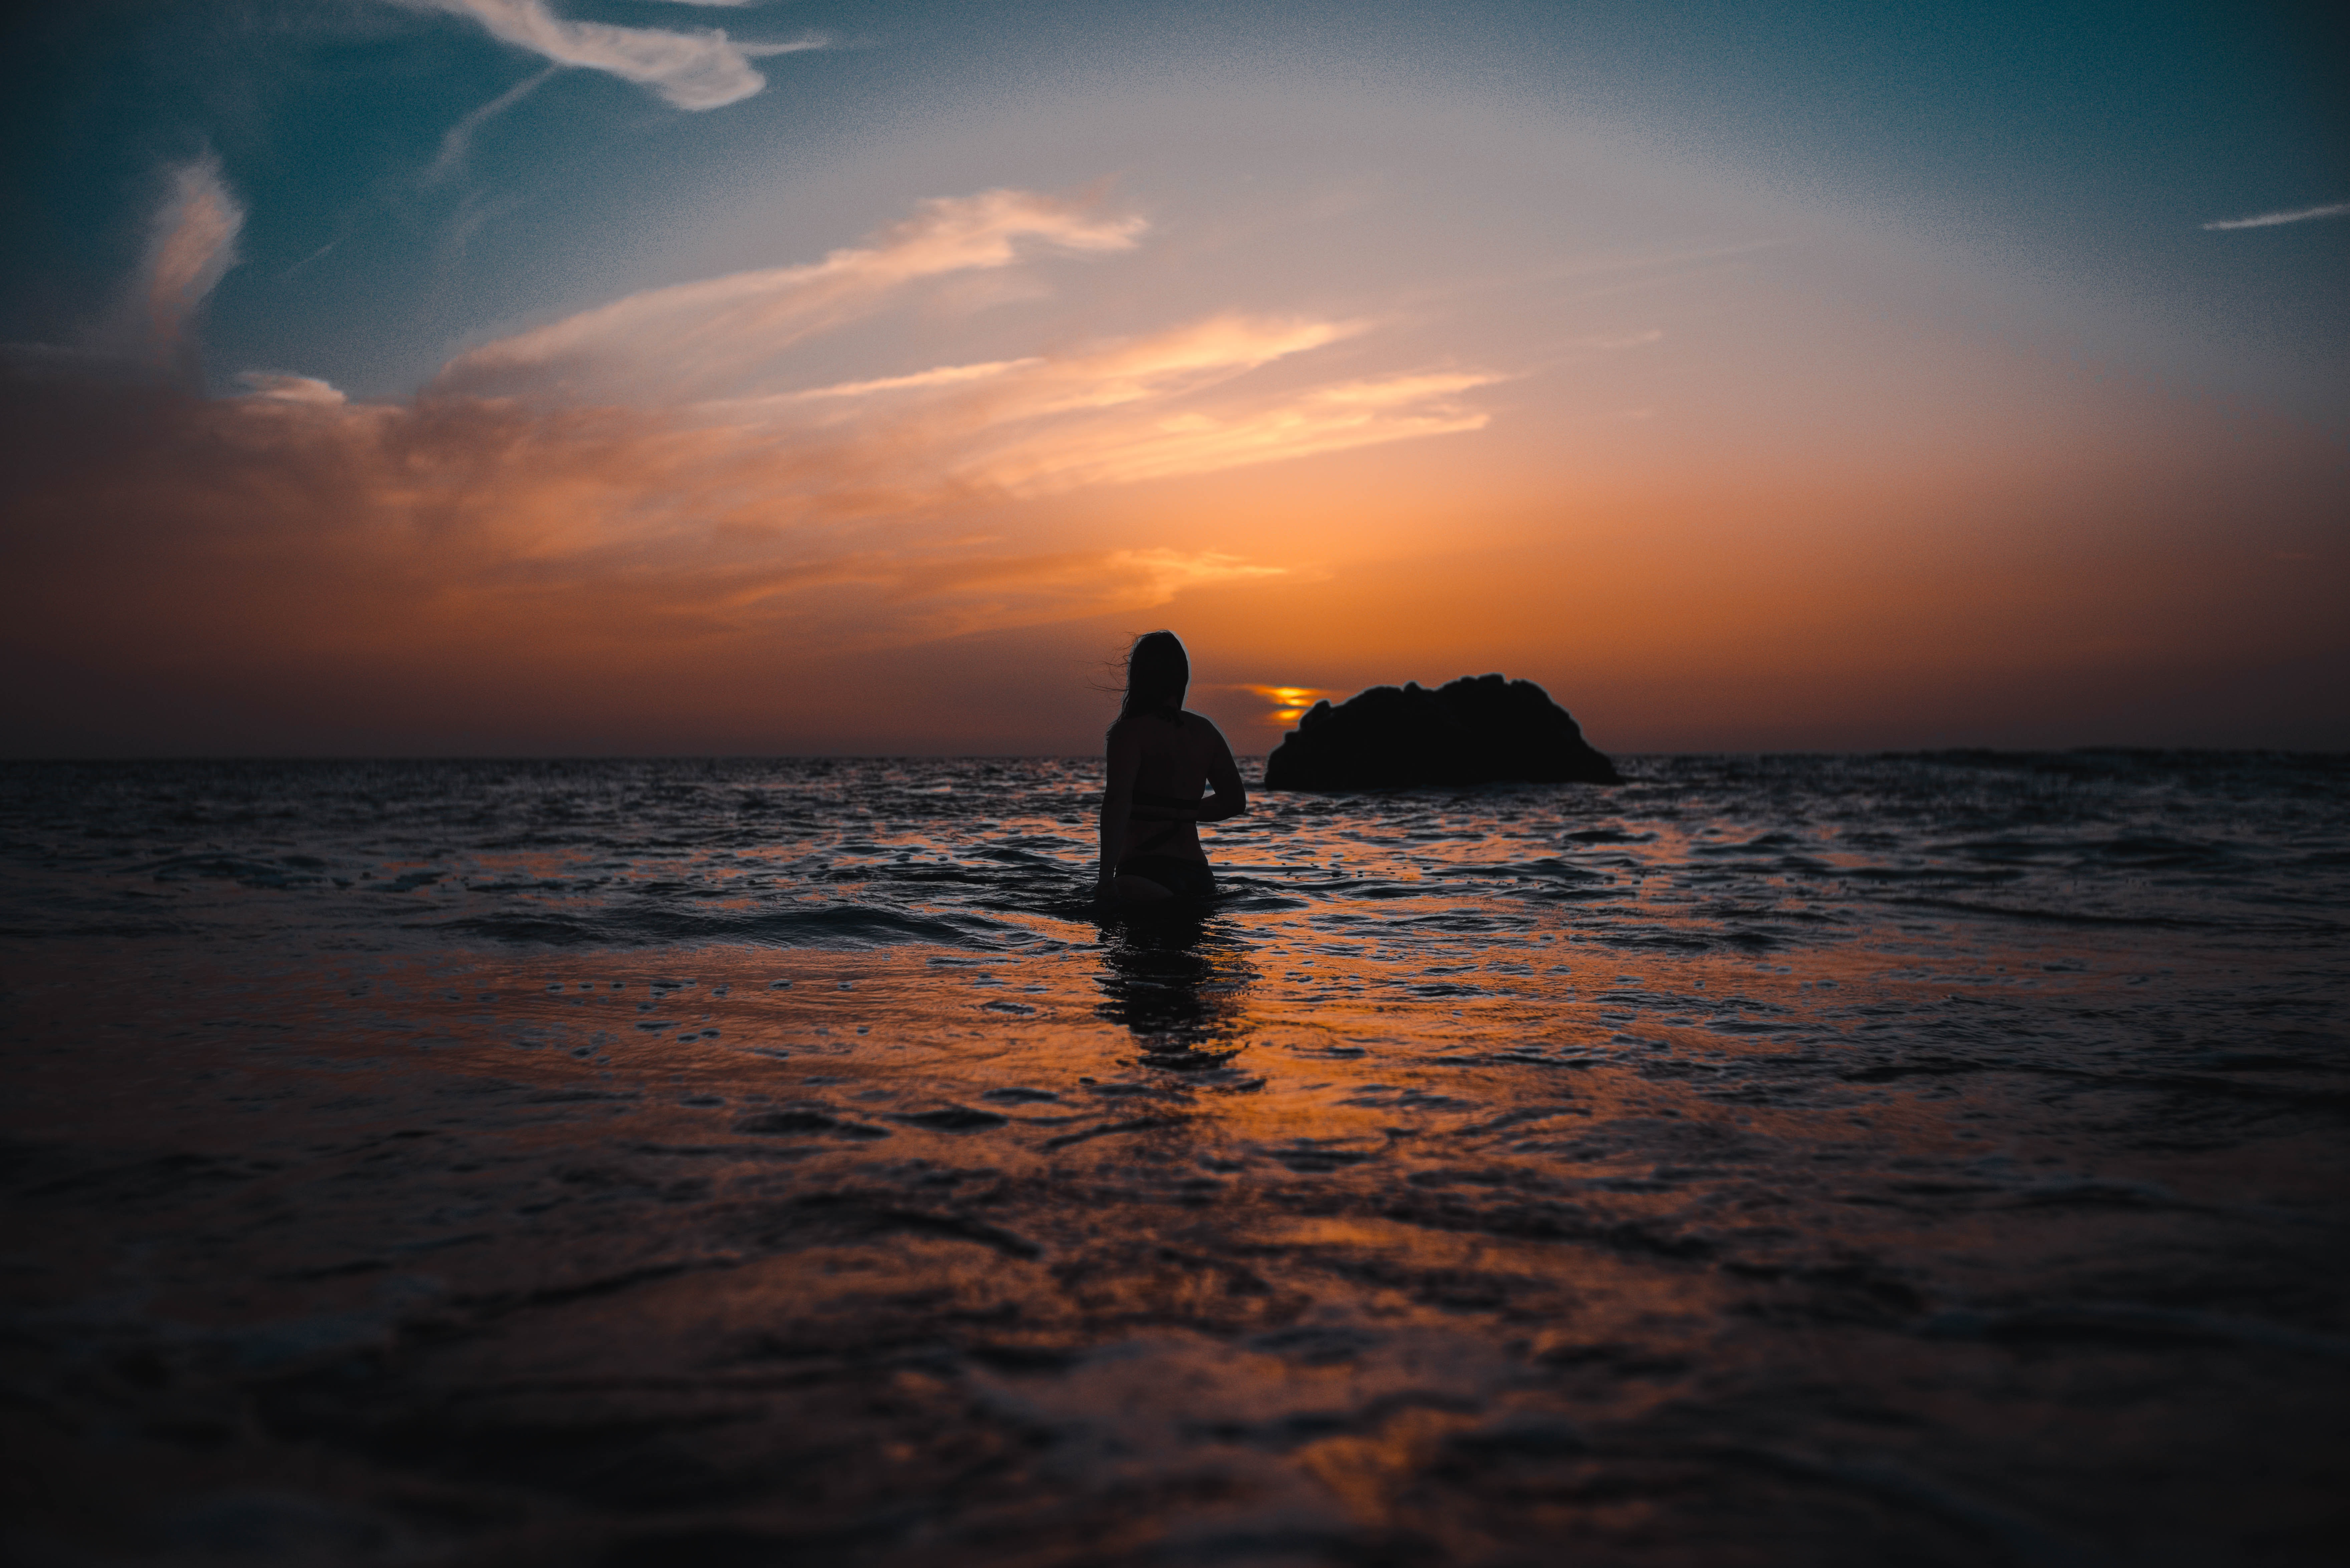 Silhouette of Woman On Ocean During Sunset, Seascape, Water, Sunset, Sunrise, HQ Photo